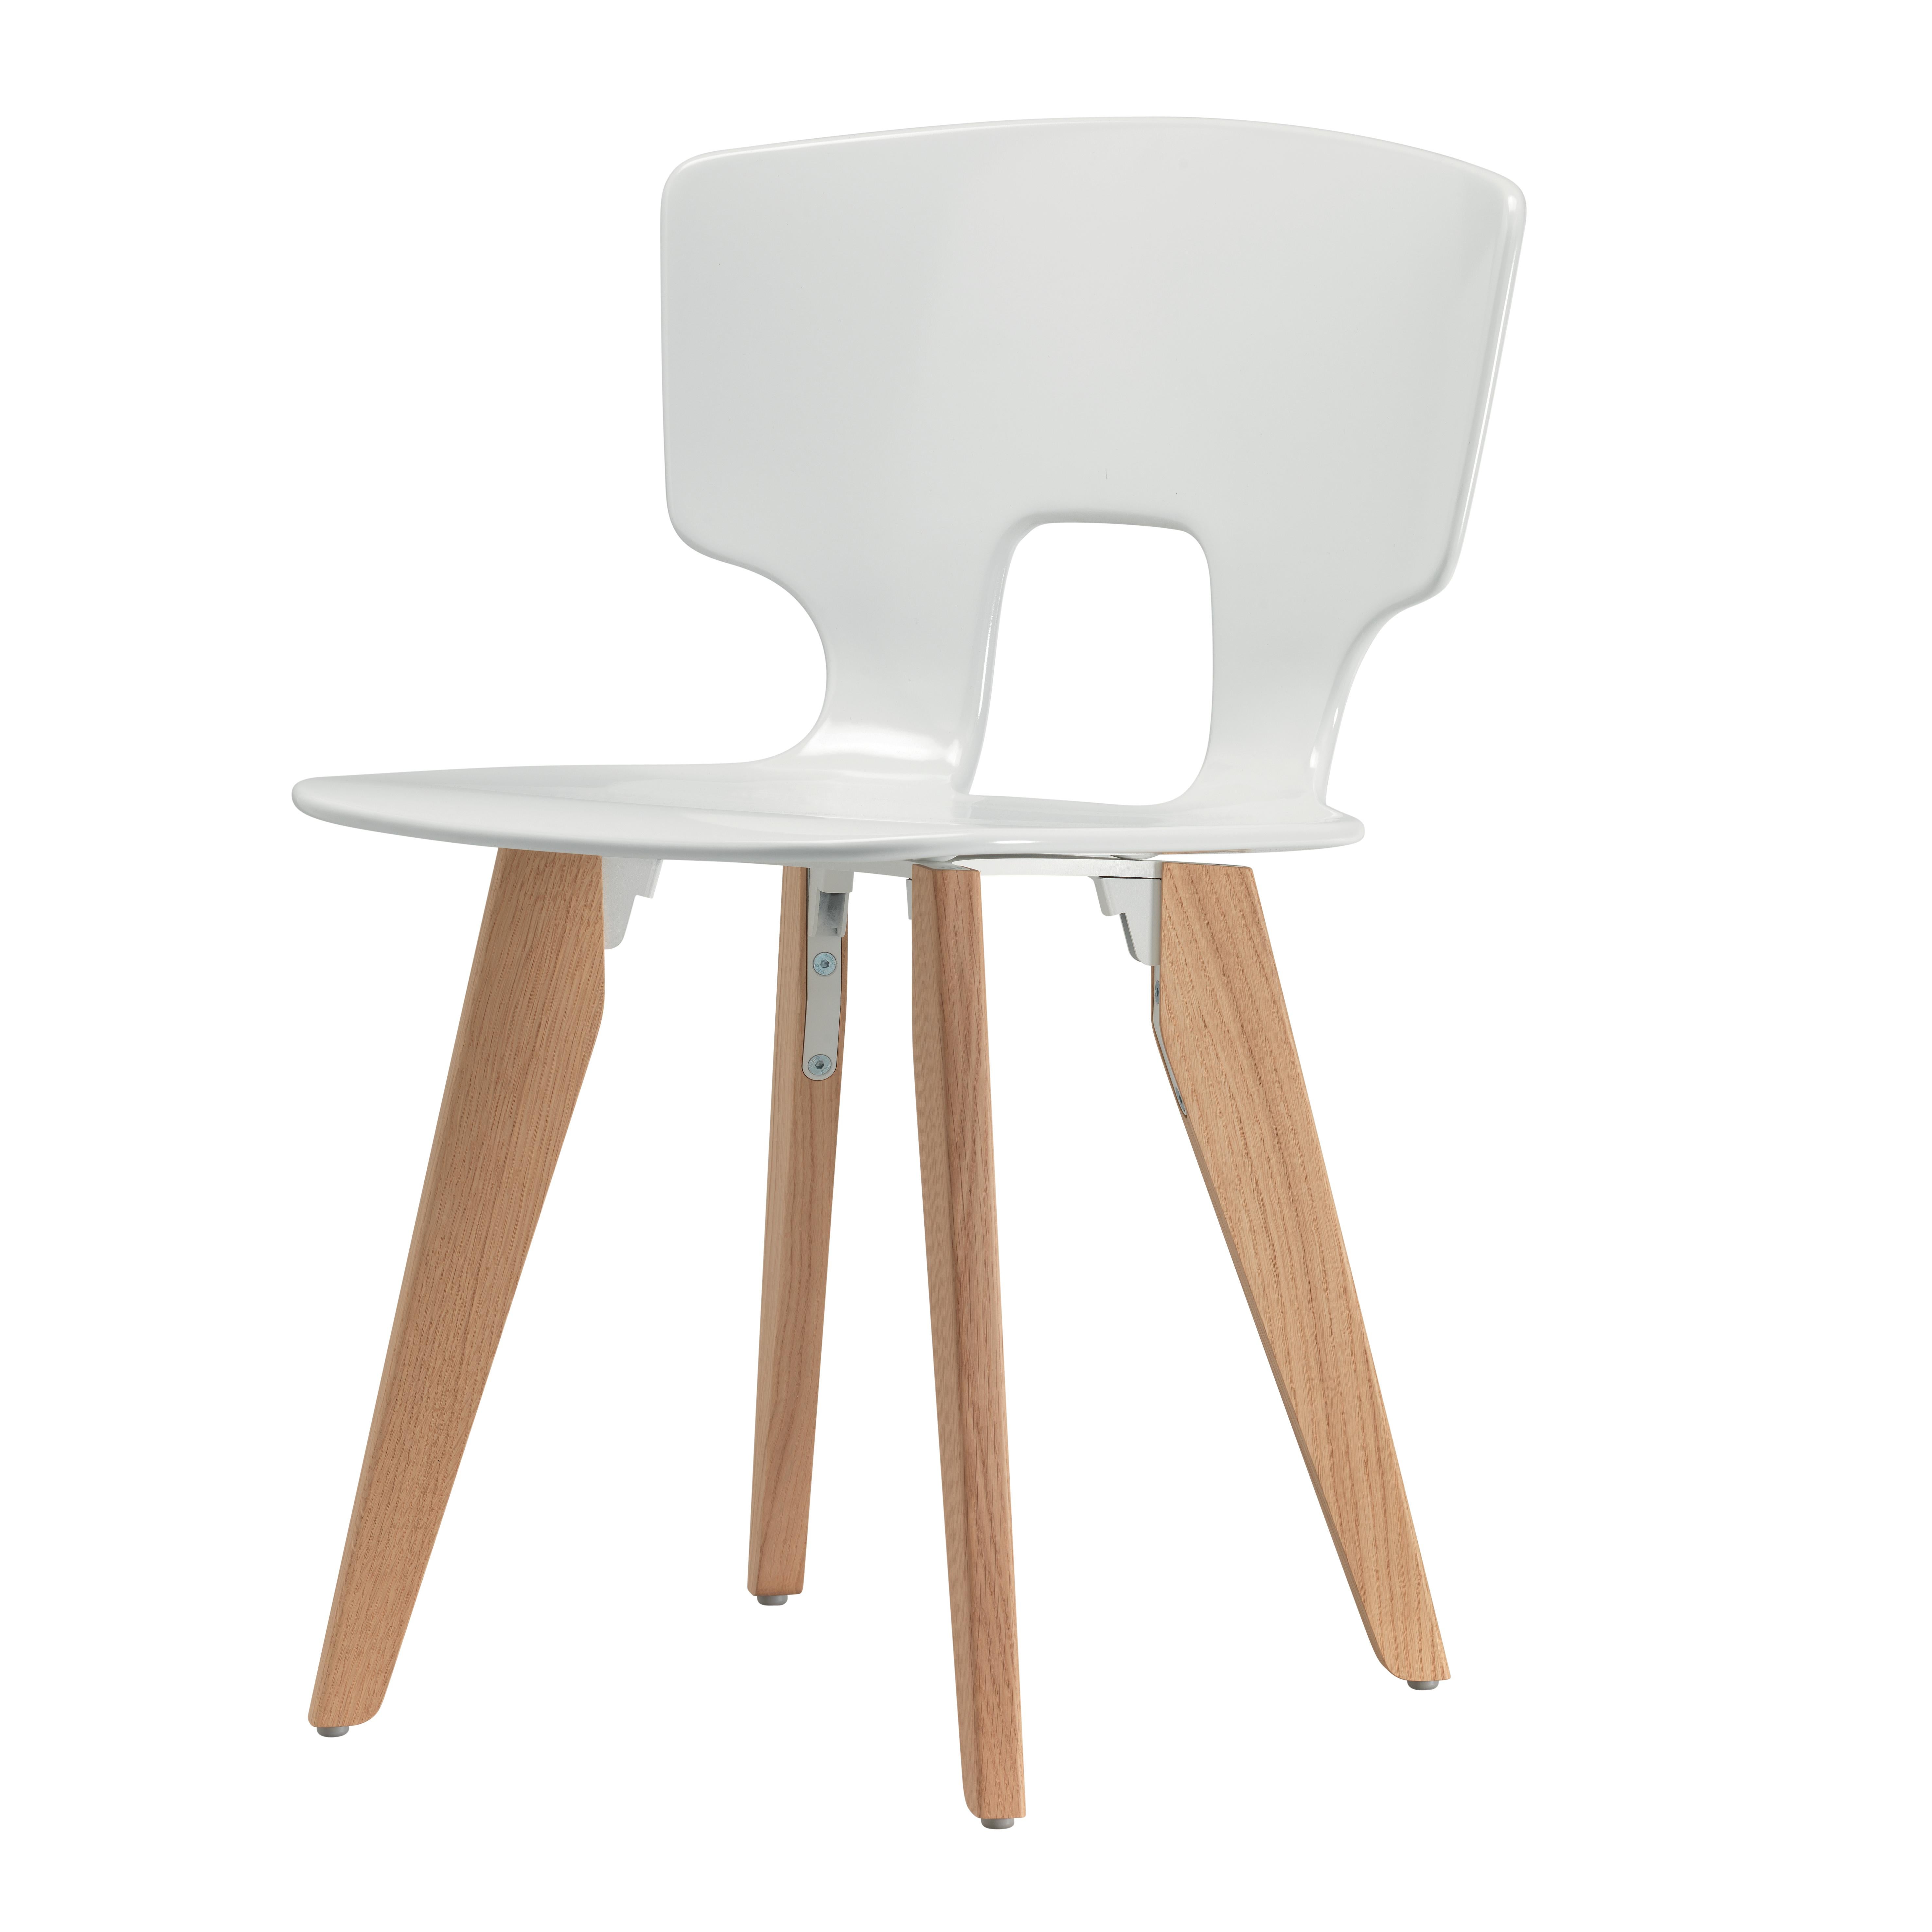 Alias 50E Erice Wood Chair in White with Oak Frame by Alfredo Häberli

Chair with solid wood structure in oak. Seat and back in solid plastic material. FSC® certified product.

Born in Lenno Tremezzina (Como), in 1945, he graduated in mechanical